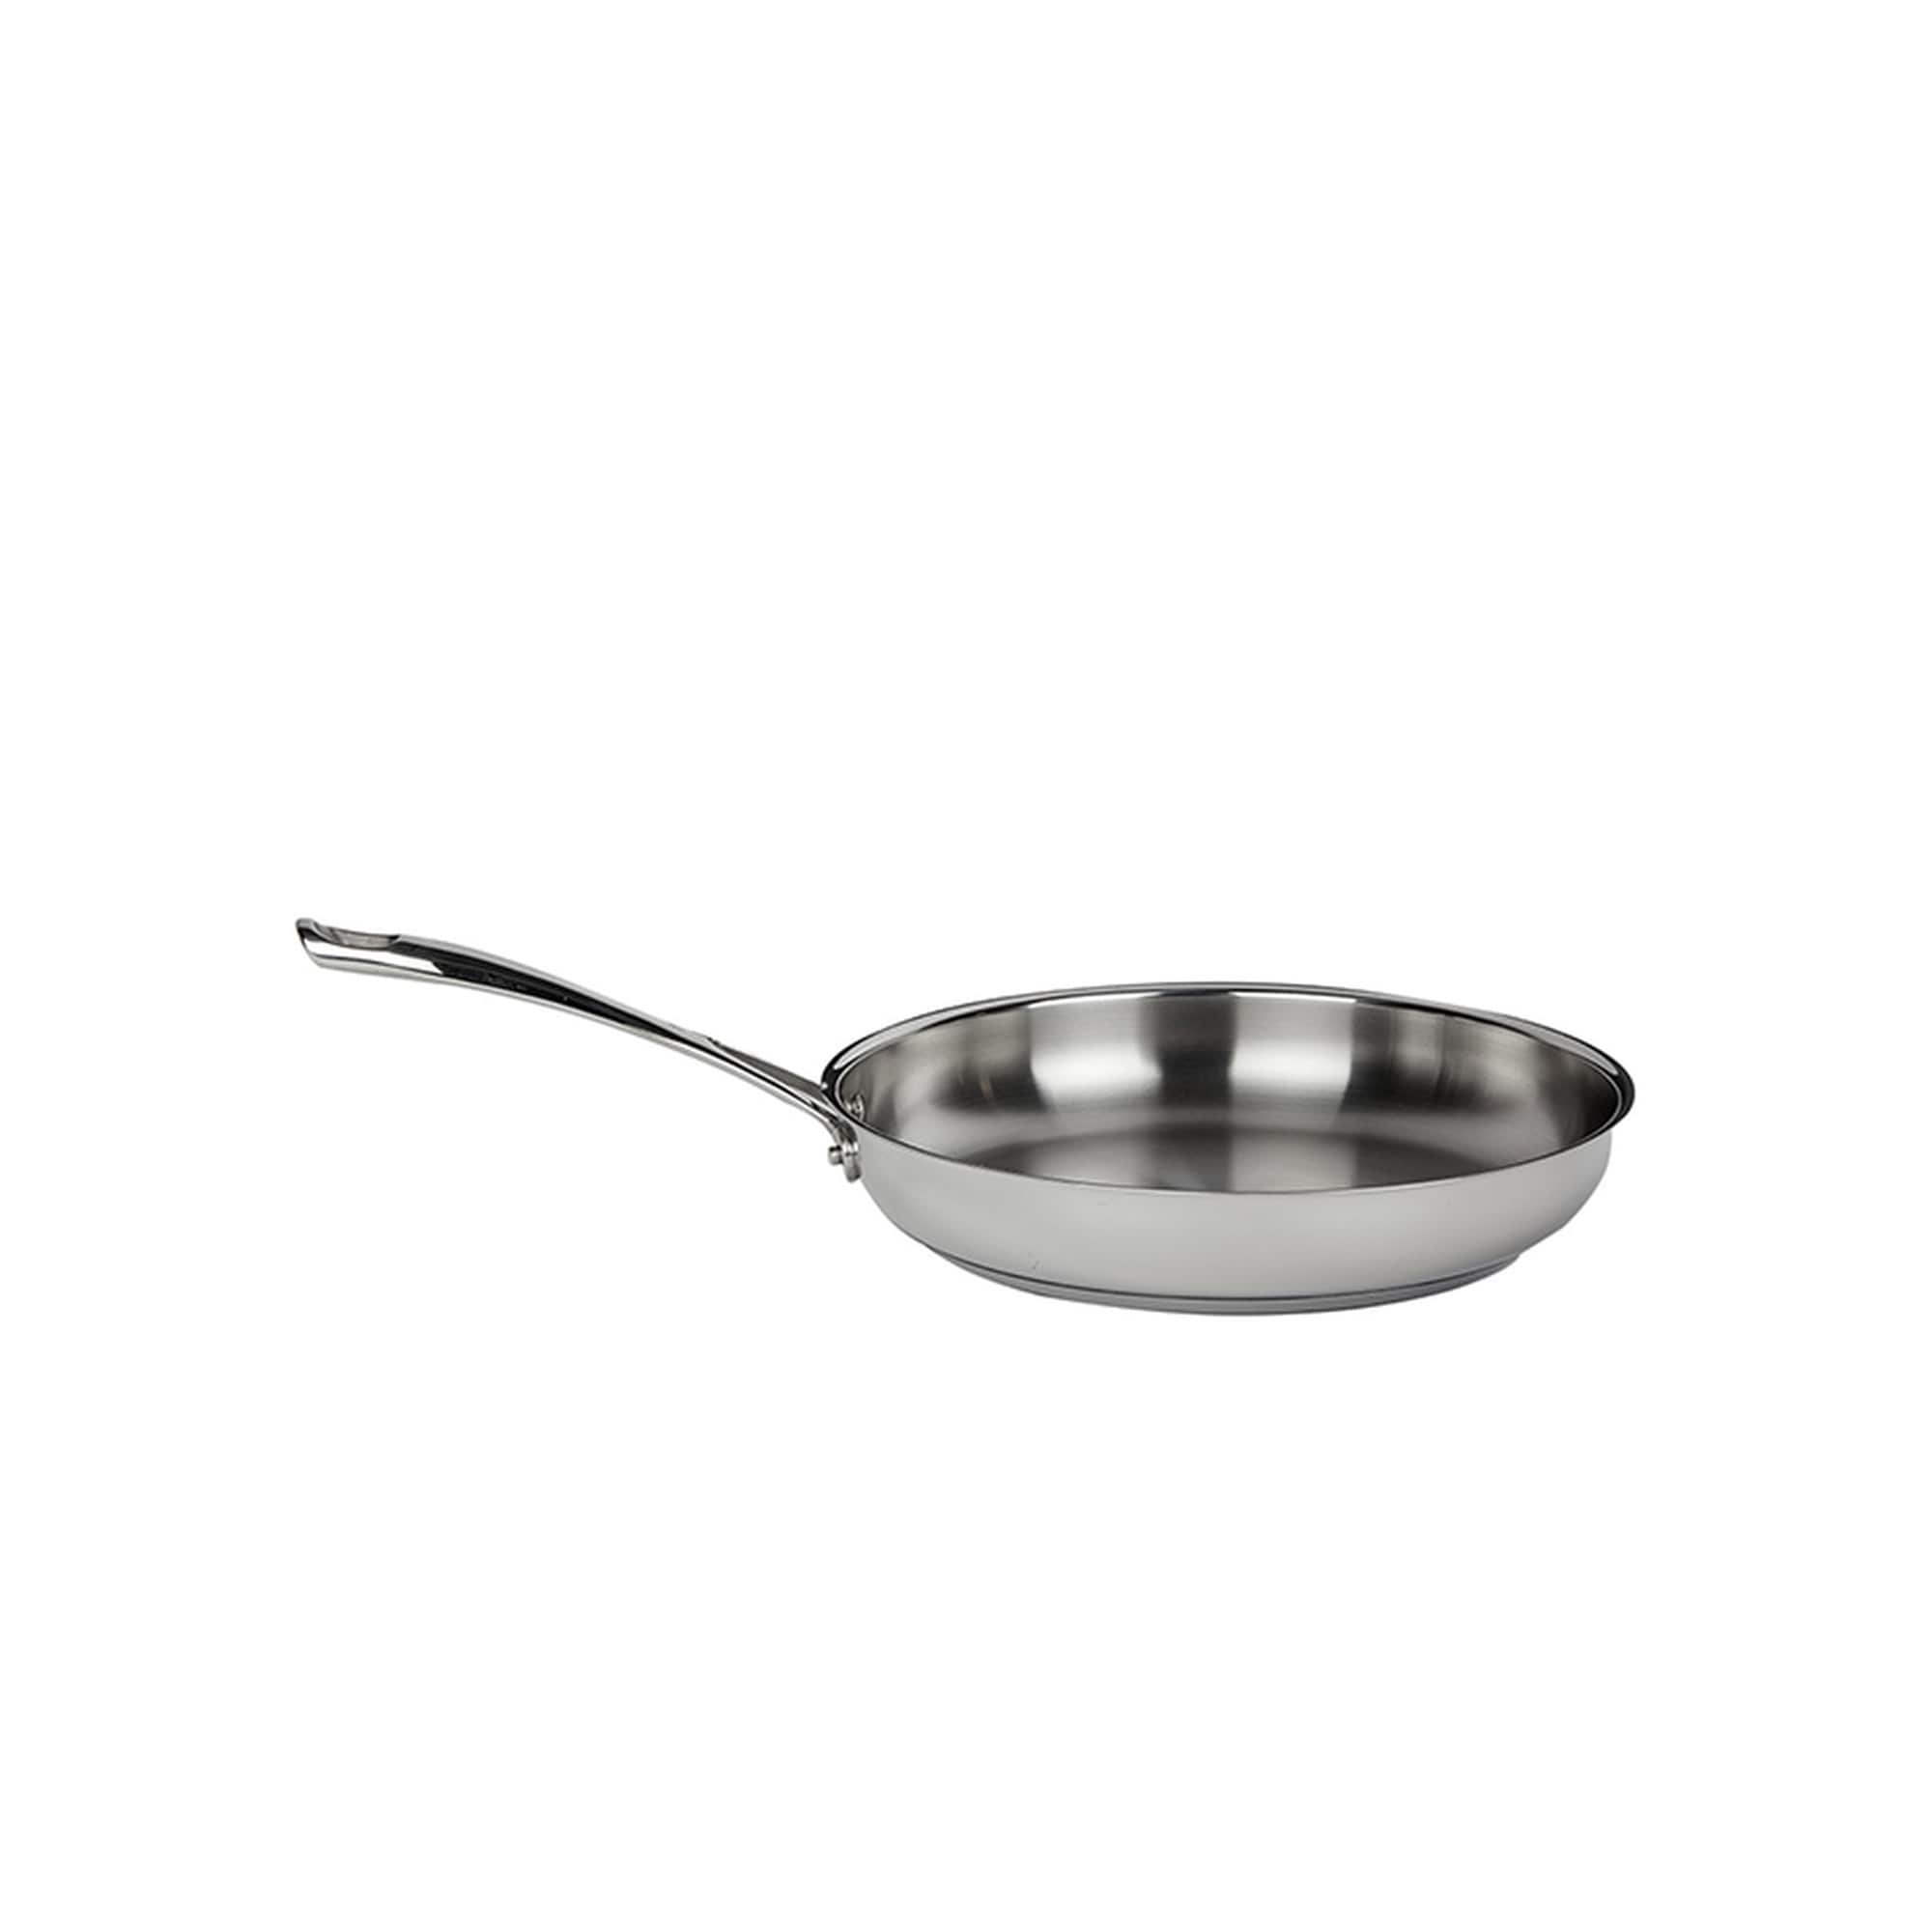 https://ak1.ostkcdn.com/images/products/is/images/direct/bac5d5447735a8ec4ac2a7460ea79578dacbd866/20cm-%288-Inch%29-Stainless-Steel-Fry-Pan.jpg